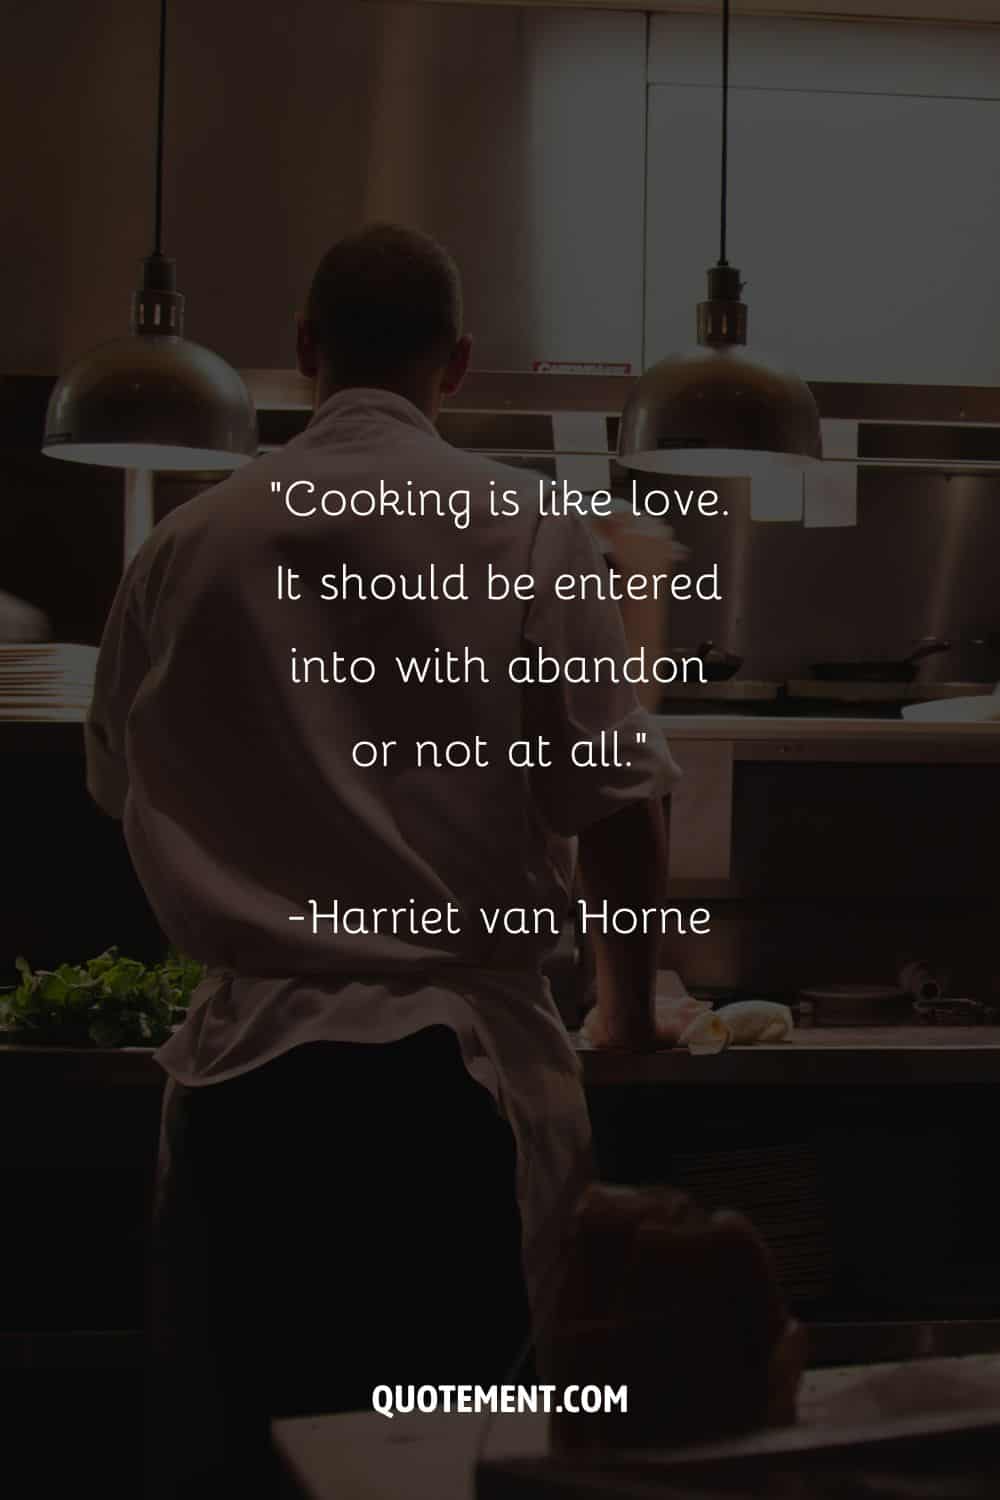 Chef in the kitchen image representing a quote on cooking.